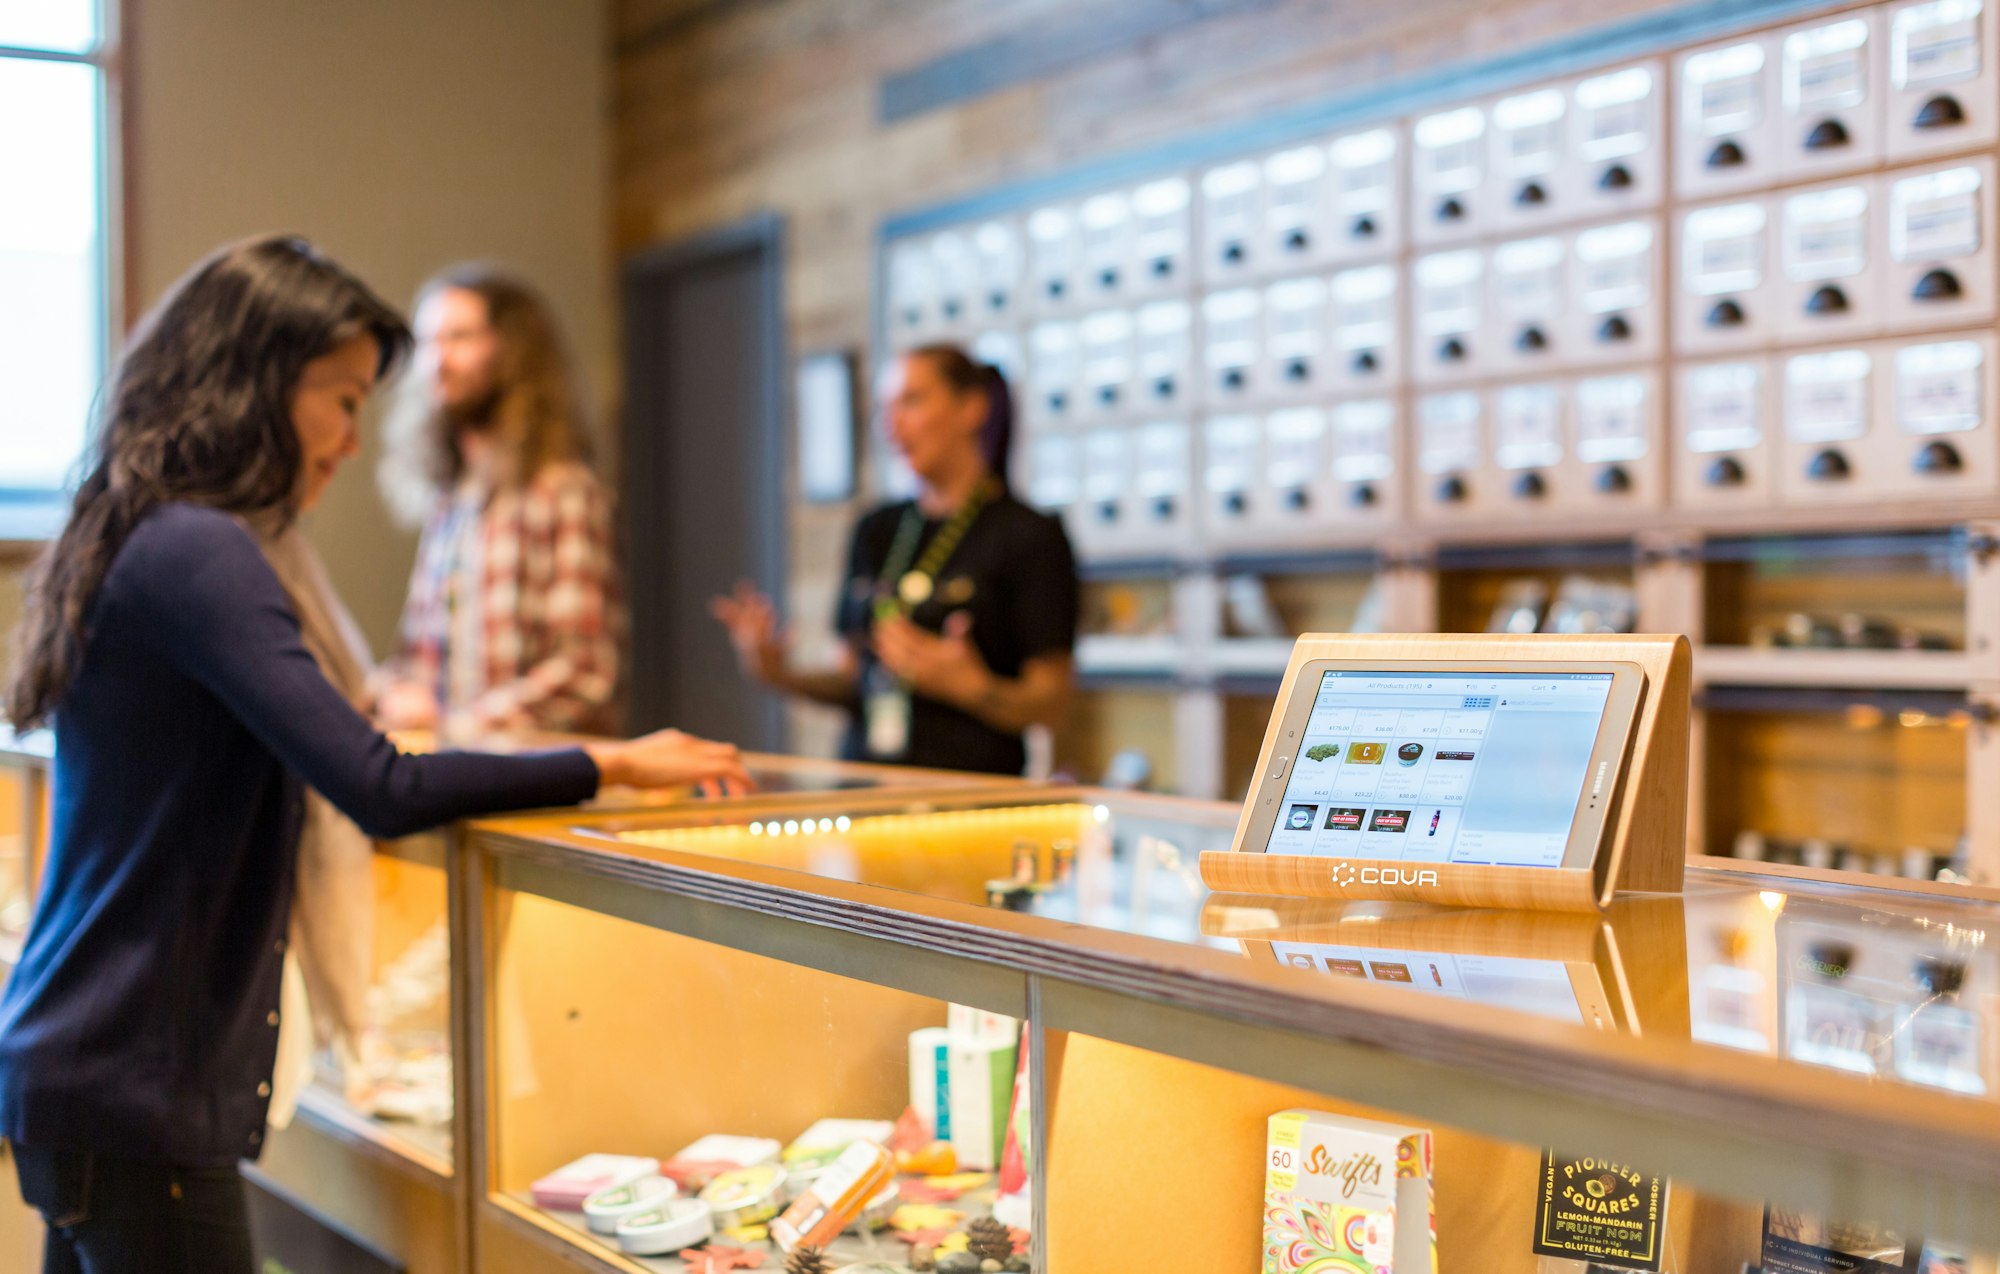 A lit-up screen displaying Cova's point of sale cannabis software is in focus atop a glass counter in a dispensary. In the background, a female cannabis customer peruses the options in the case while two budtenders help another consumer.